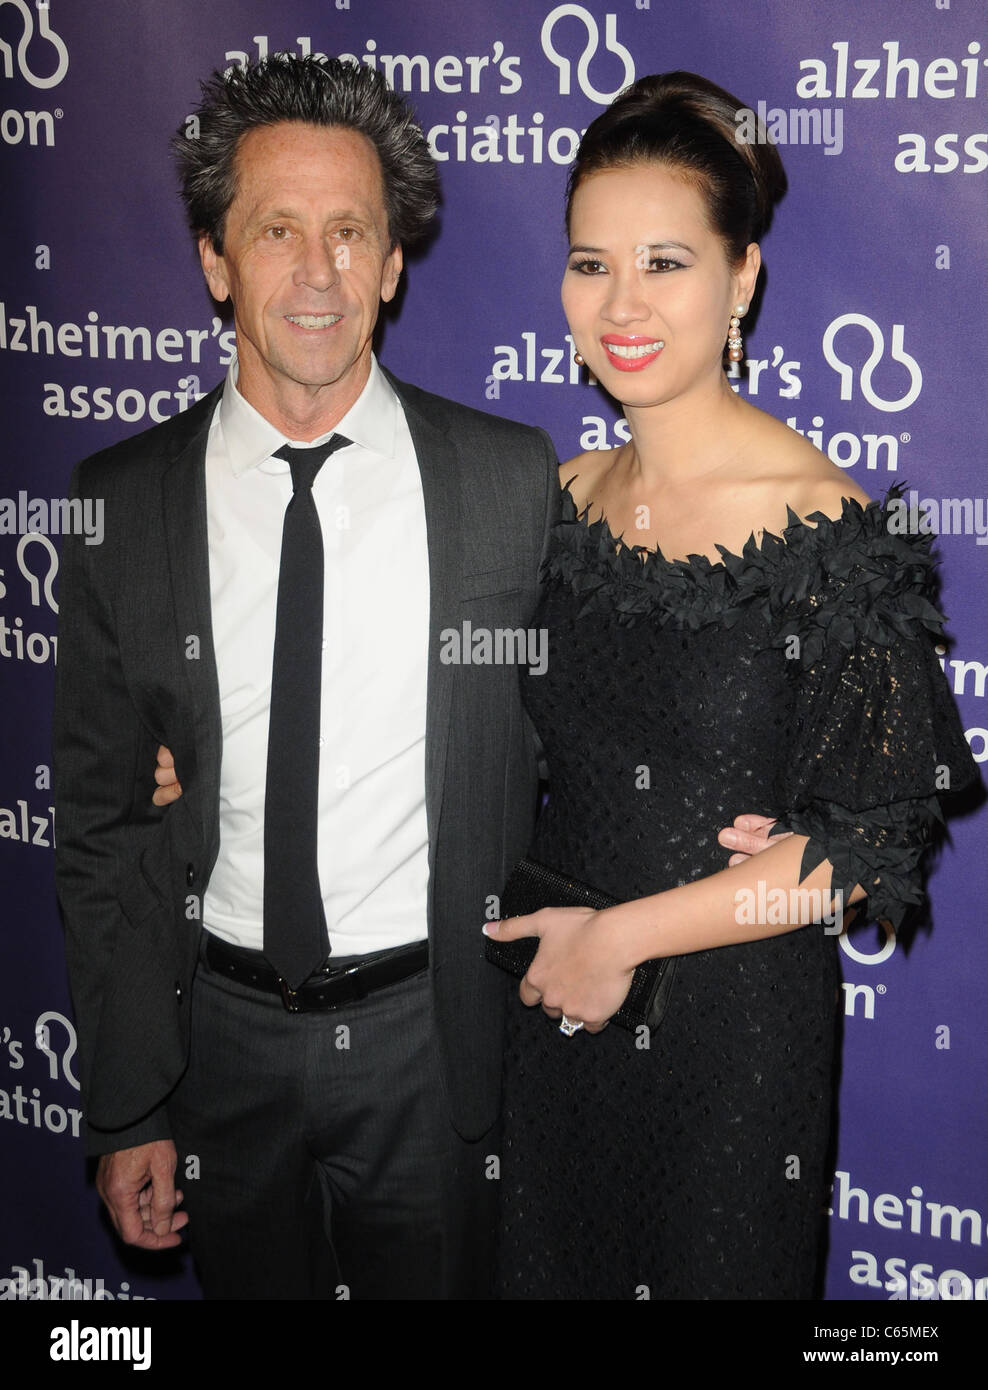 Brian Grazer in attendance for 19th Annual A Night at Sardi's Fundraiser and Awards Dinner, Beverly Hilton Hotel, Beverly Hills, CA March 16, 2011. Photo By: Dee Cercone/Everett Collection Stock Photo